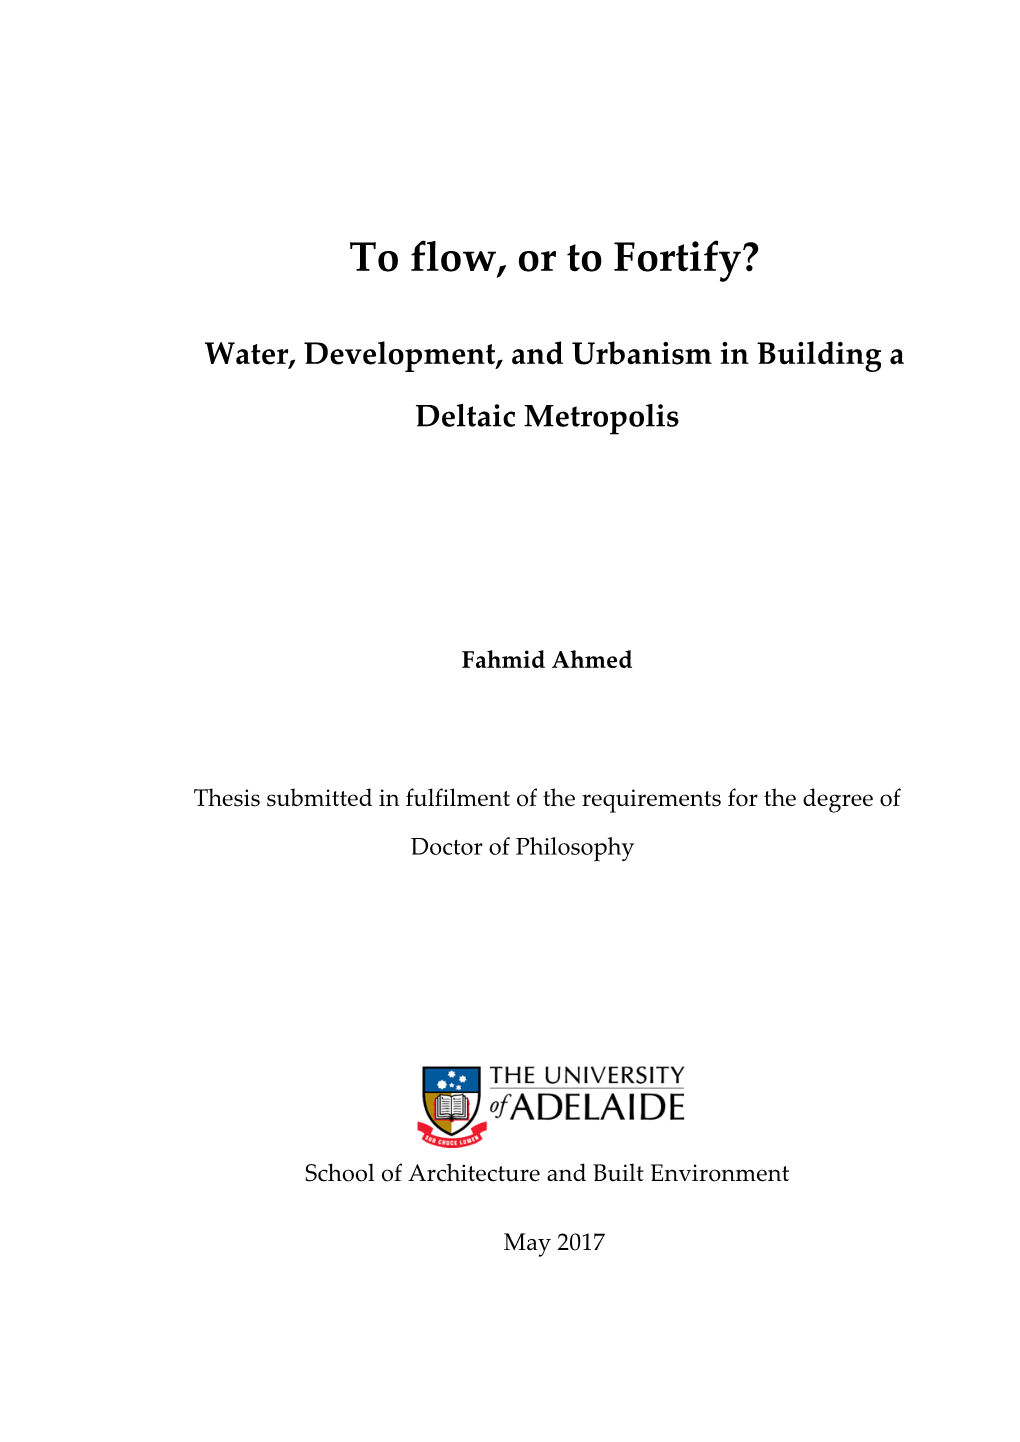 Water, Development, and Urbanism in Building a Deltaic Metropolis